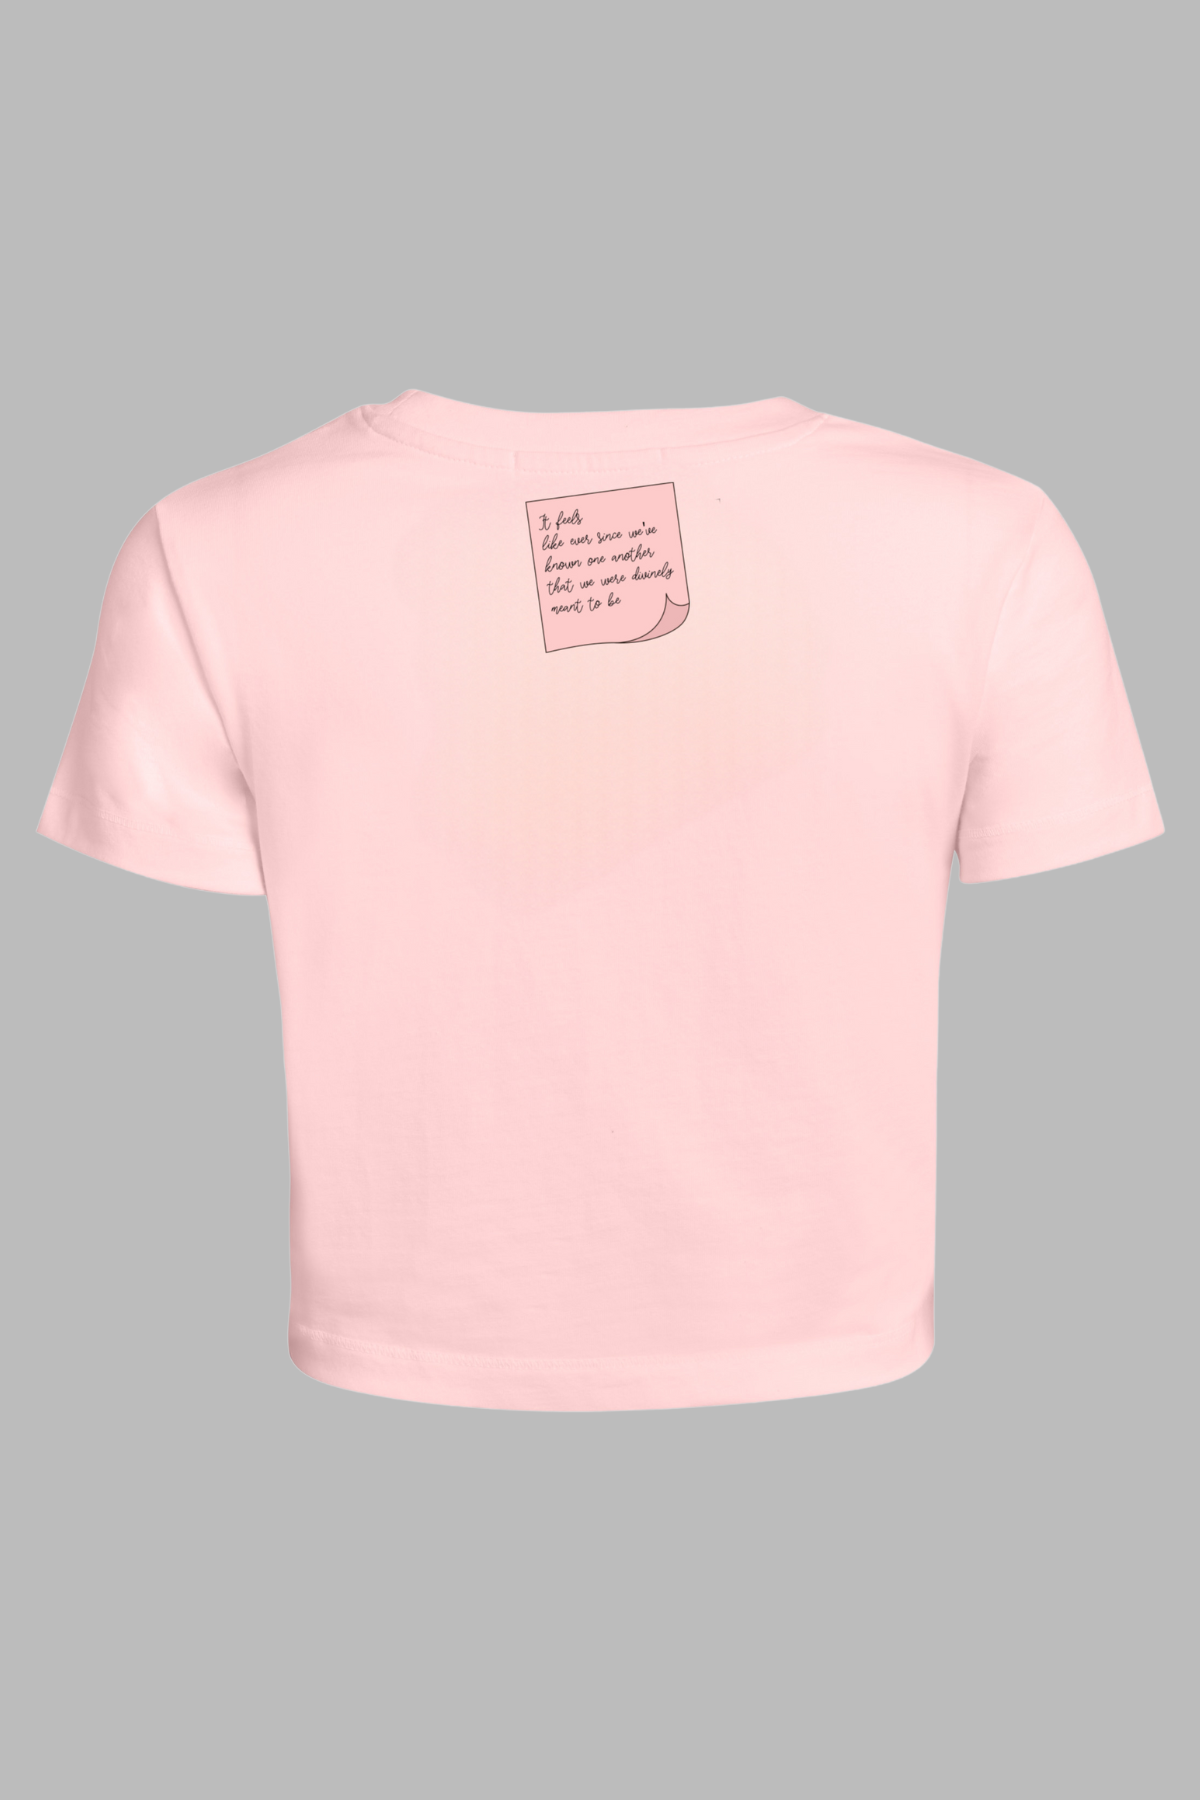 Parsian Love Note Baby Tee